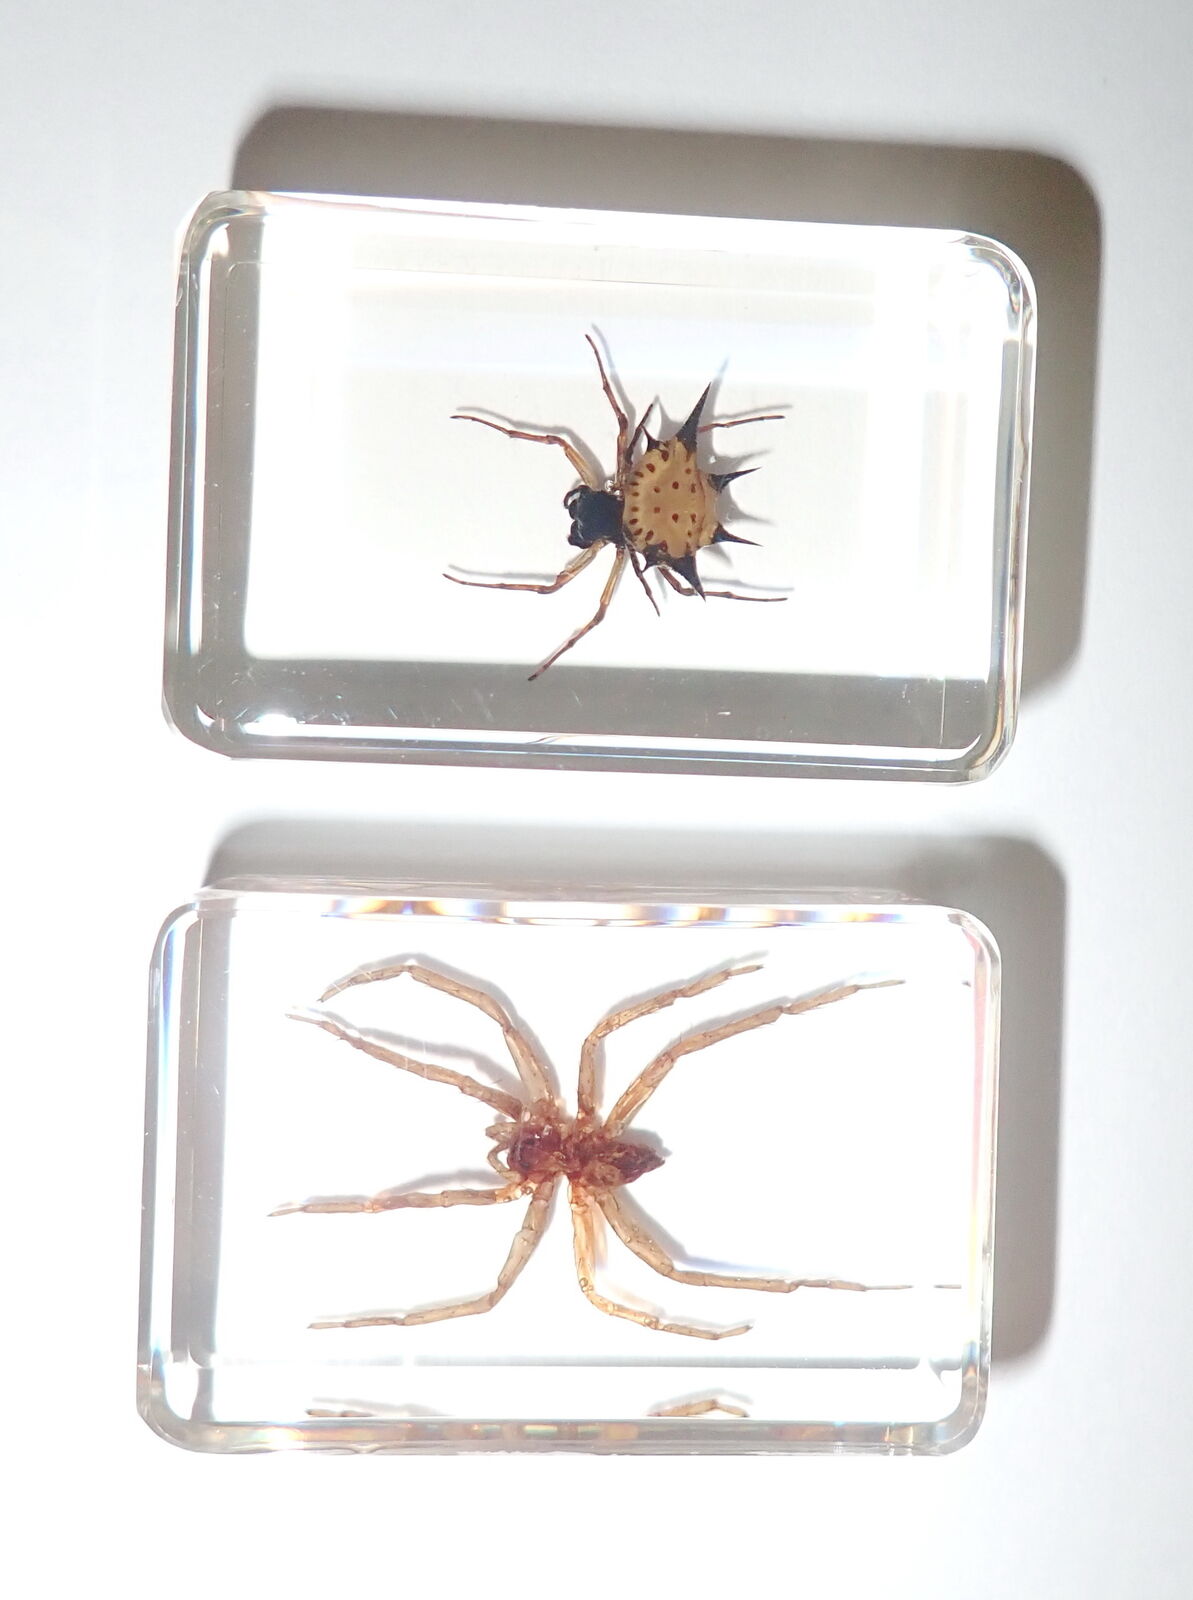 Spiny Spider + Water Spider Set in 2 Clear Small Resin Block Education Aid TE1S2